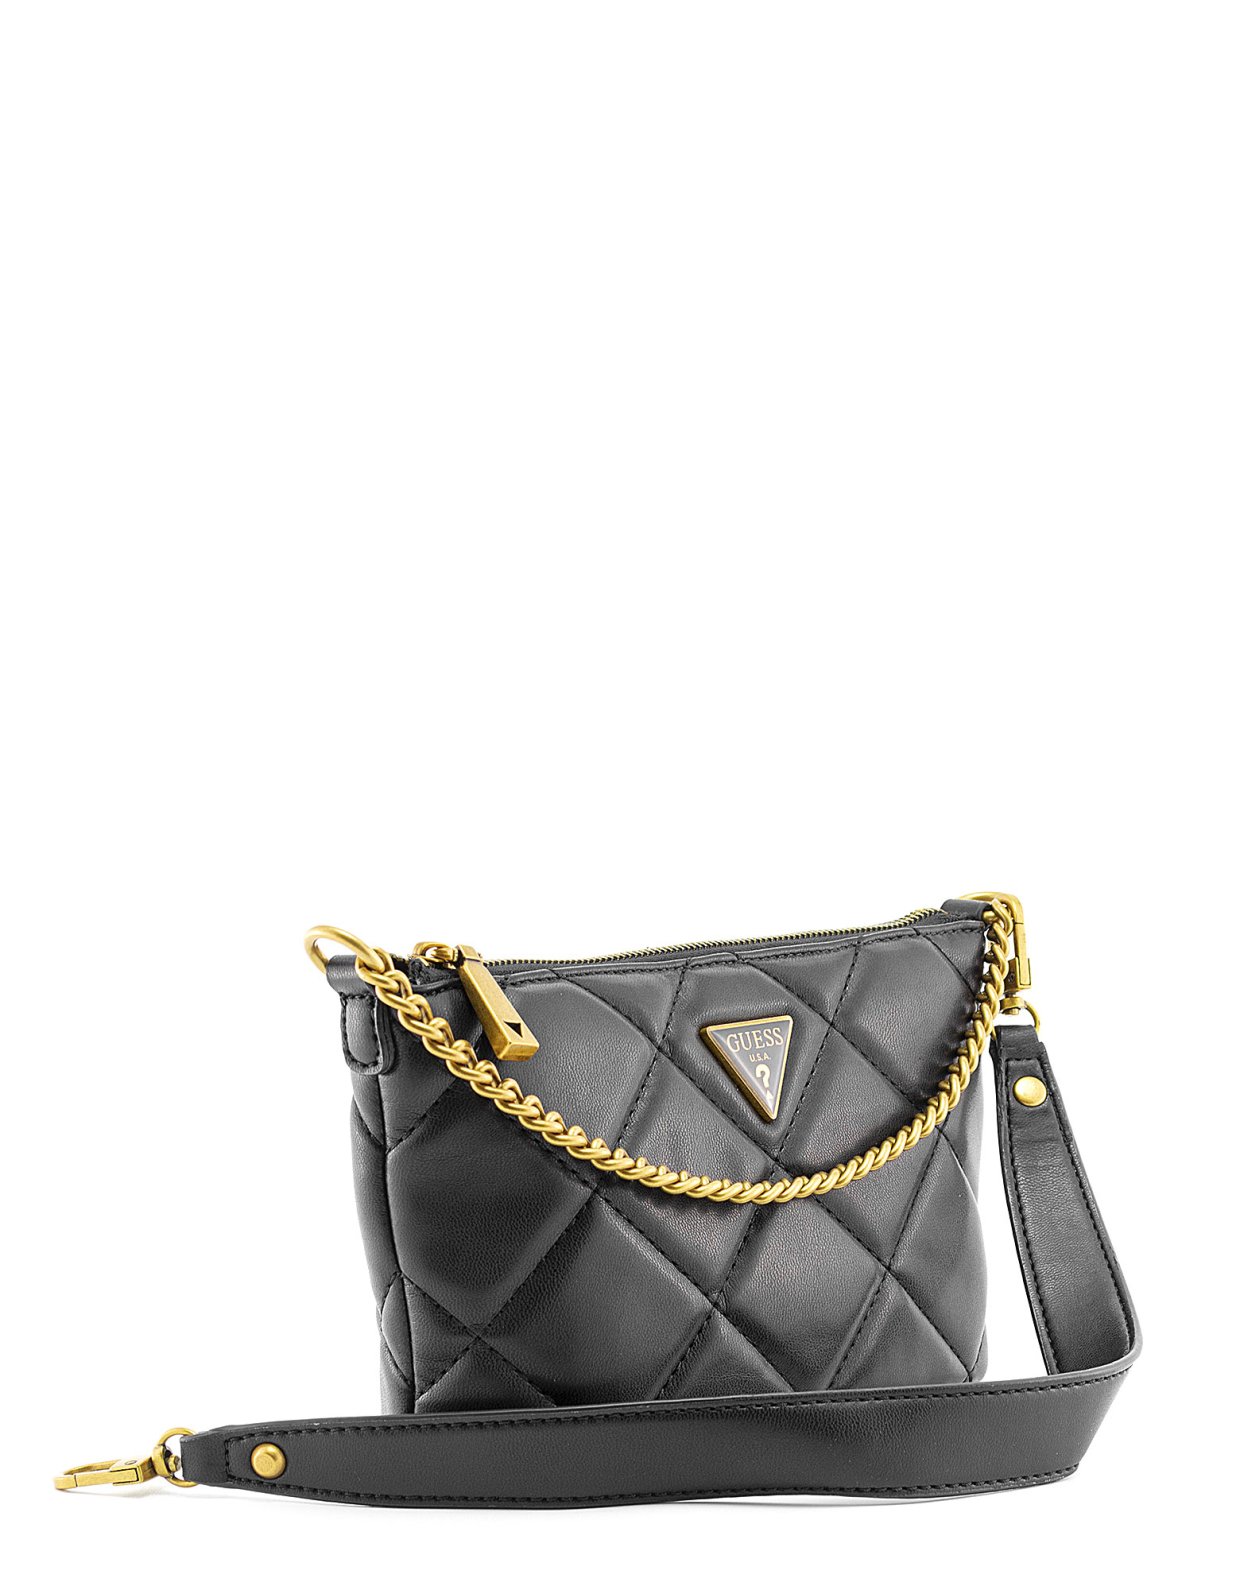 Guess Cessily bucket bag black